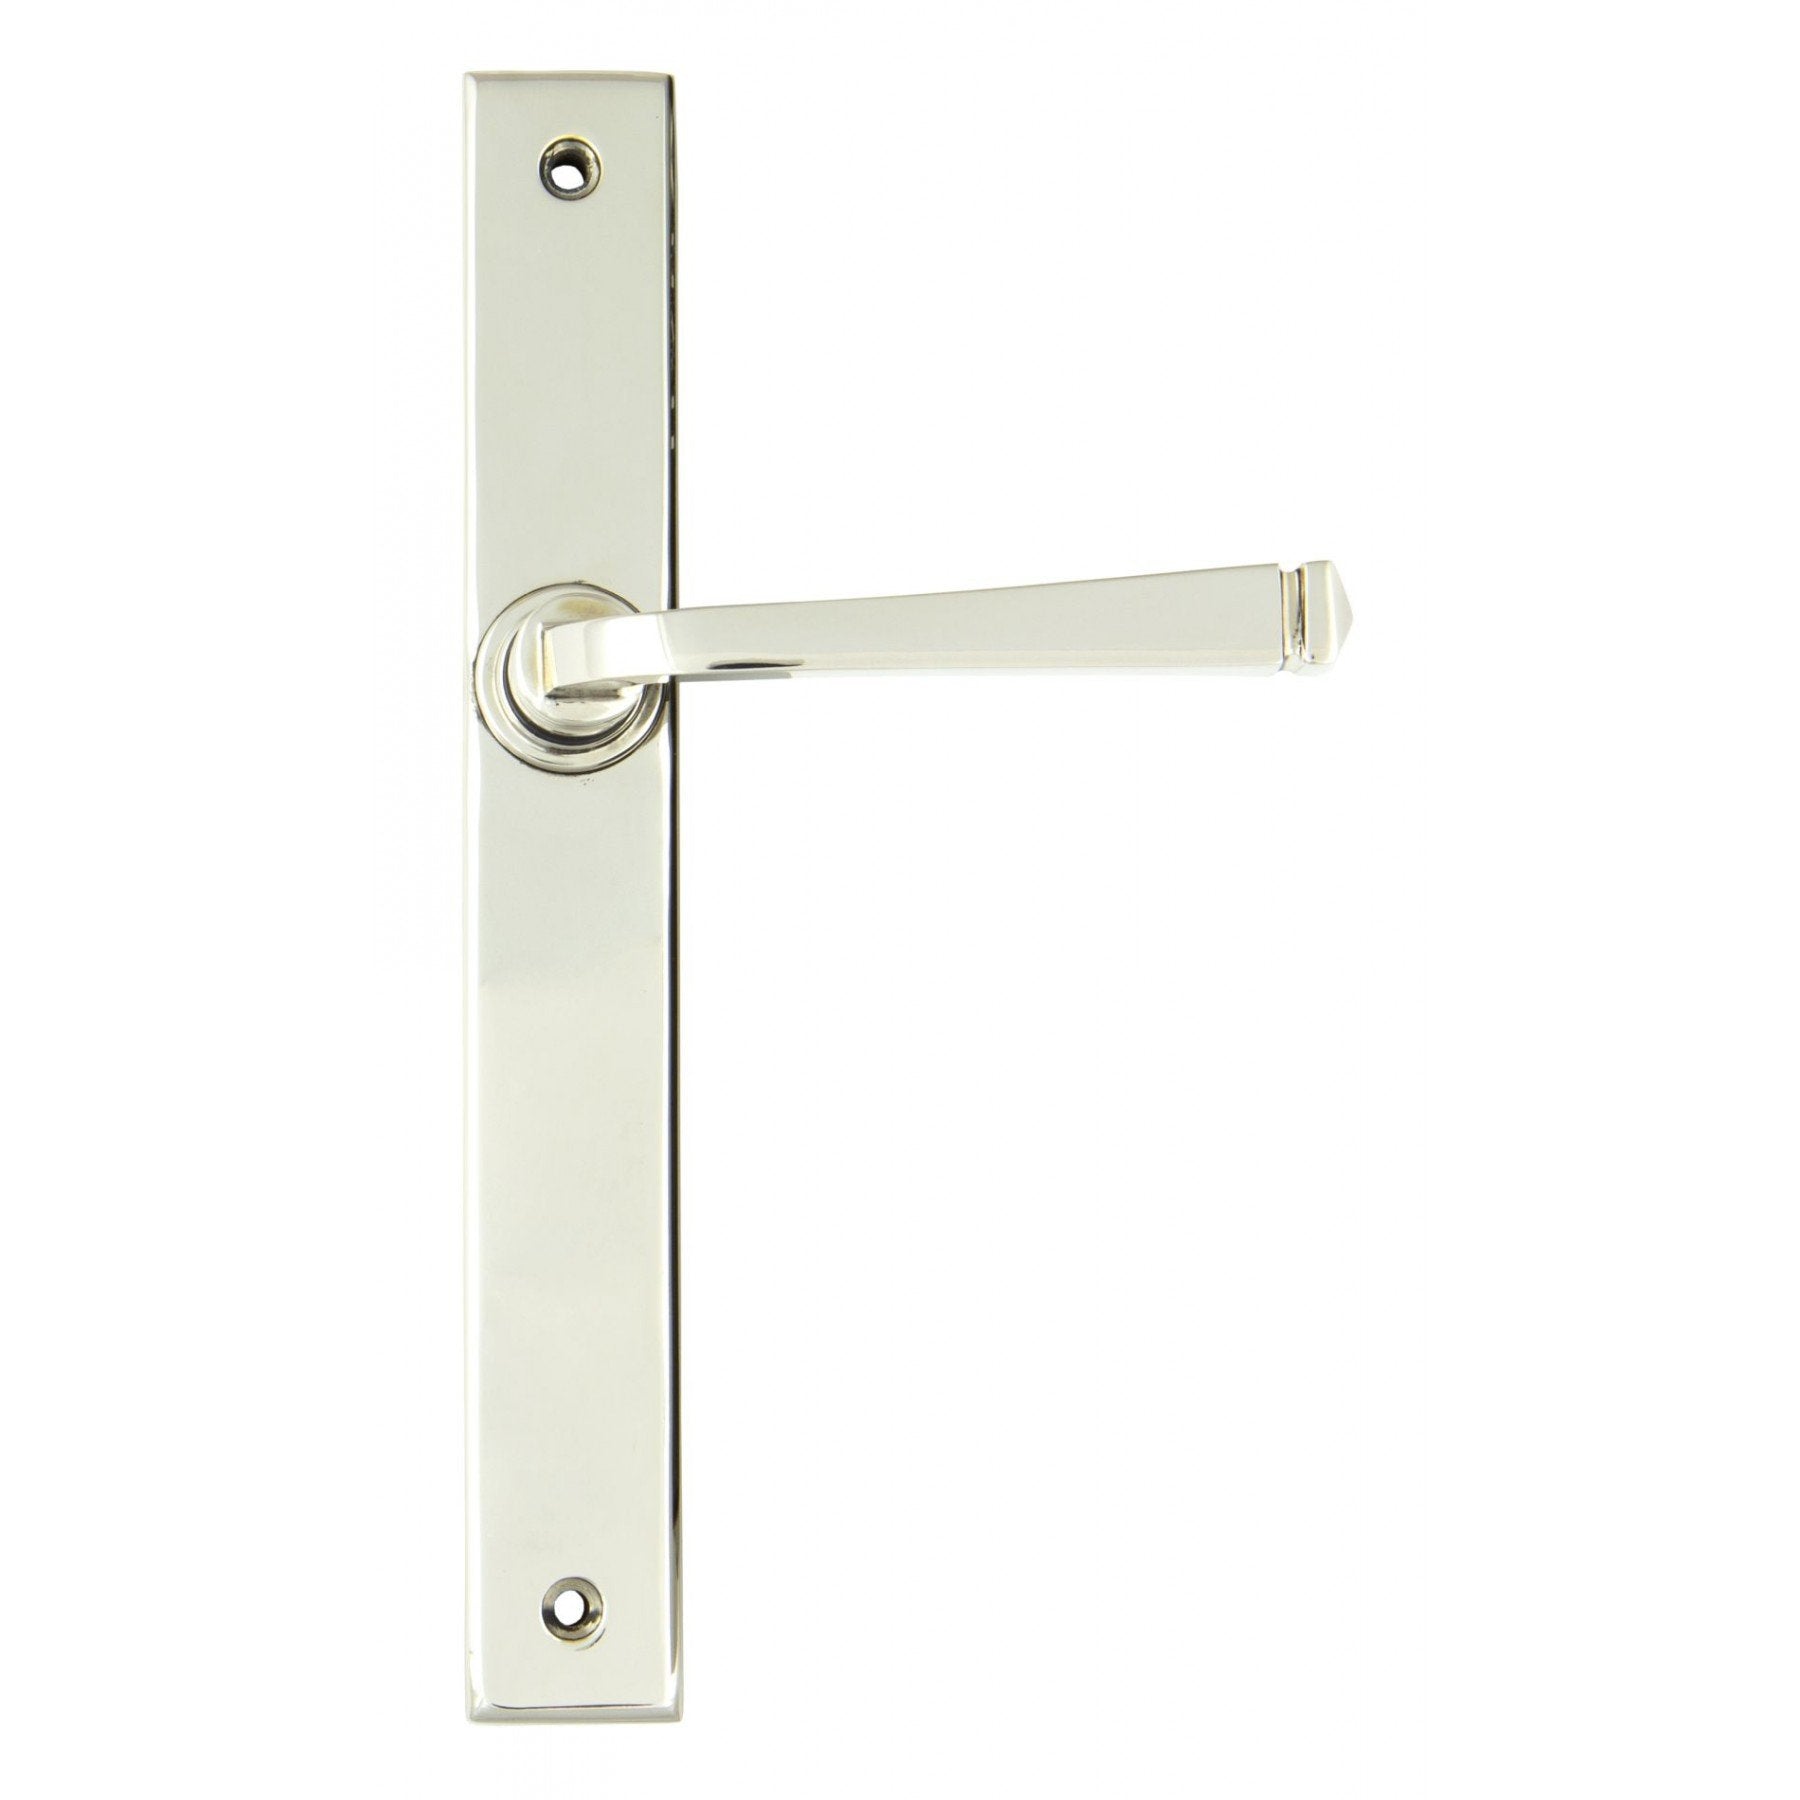 From the Anvil Polished Nickel Avon Slimline Lever Latch Set - No.42 Interiors